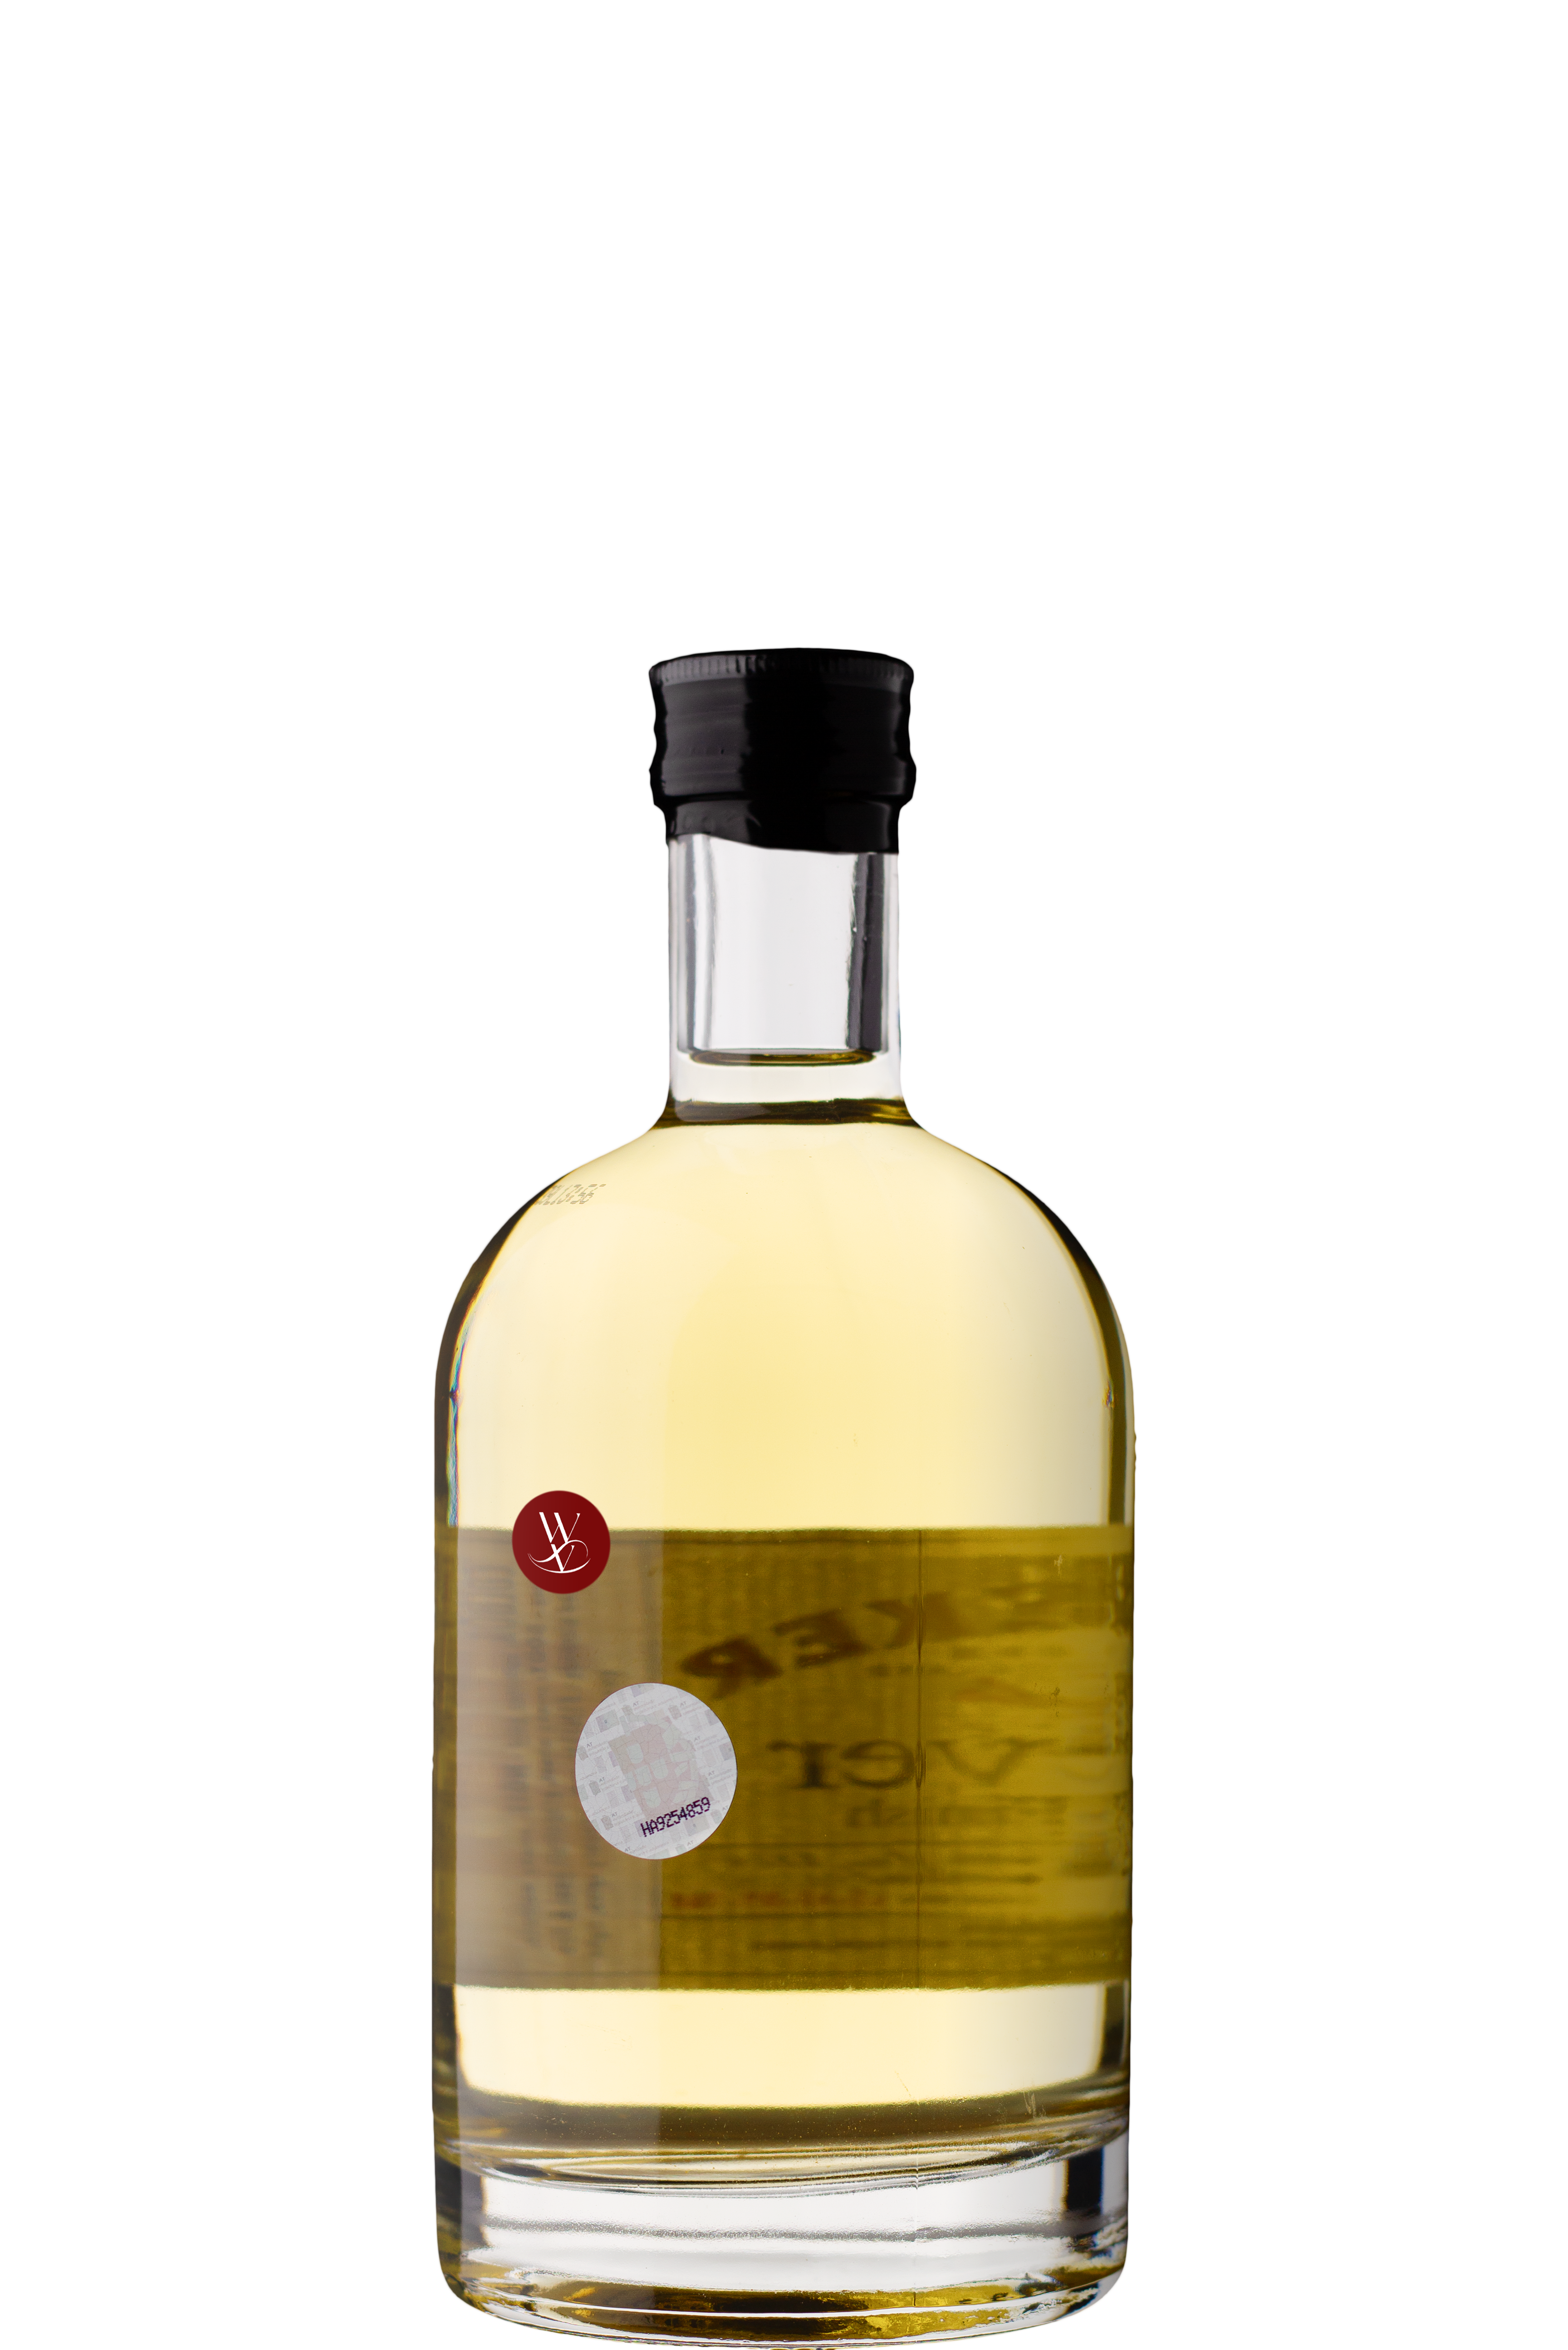 WineVins Wenneker Old Islay Cask Finish